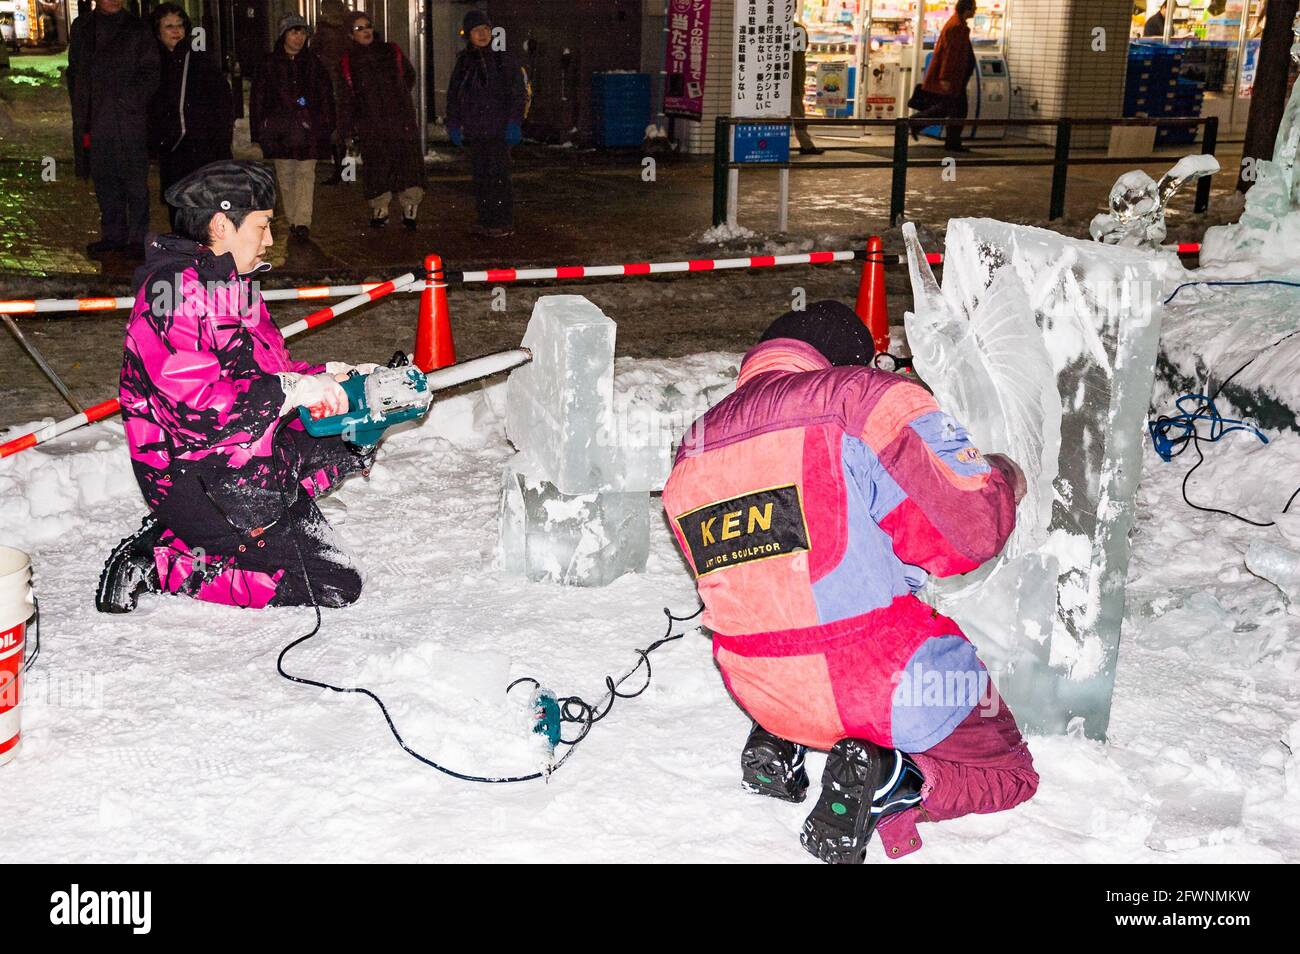 Two sculptors use chainsaws to sculpt art work out of blocks of ice at the Susukino Ice Festival, part of the Sapporo Snow Festival celebrations in Ja Stock Photo